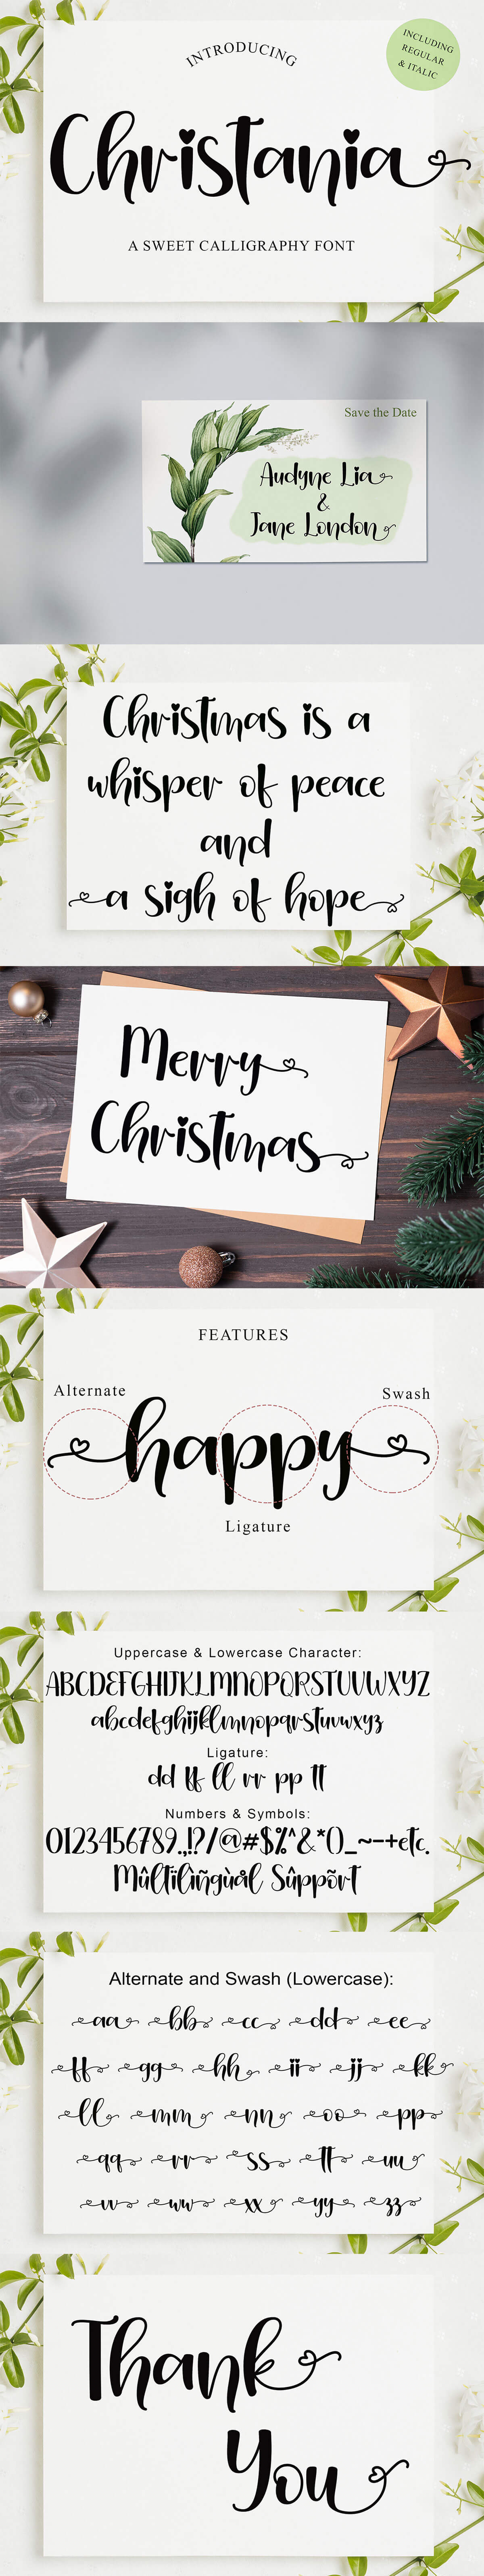 Christania Calligraphy Font